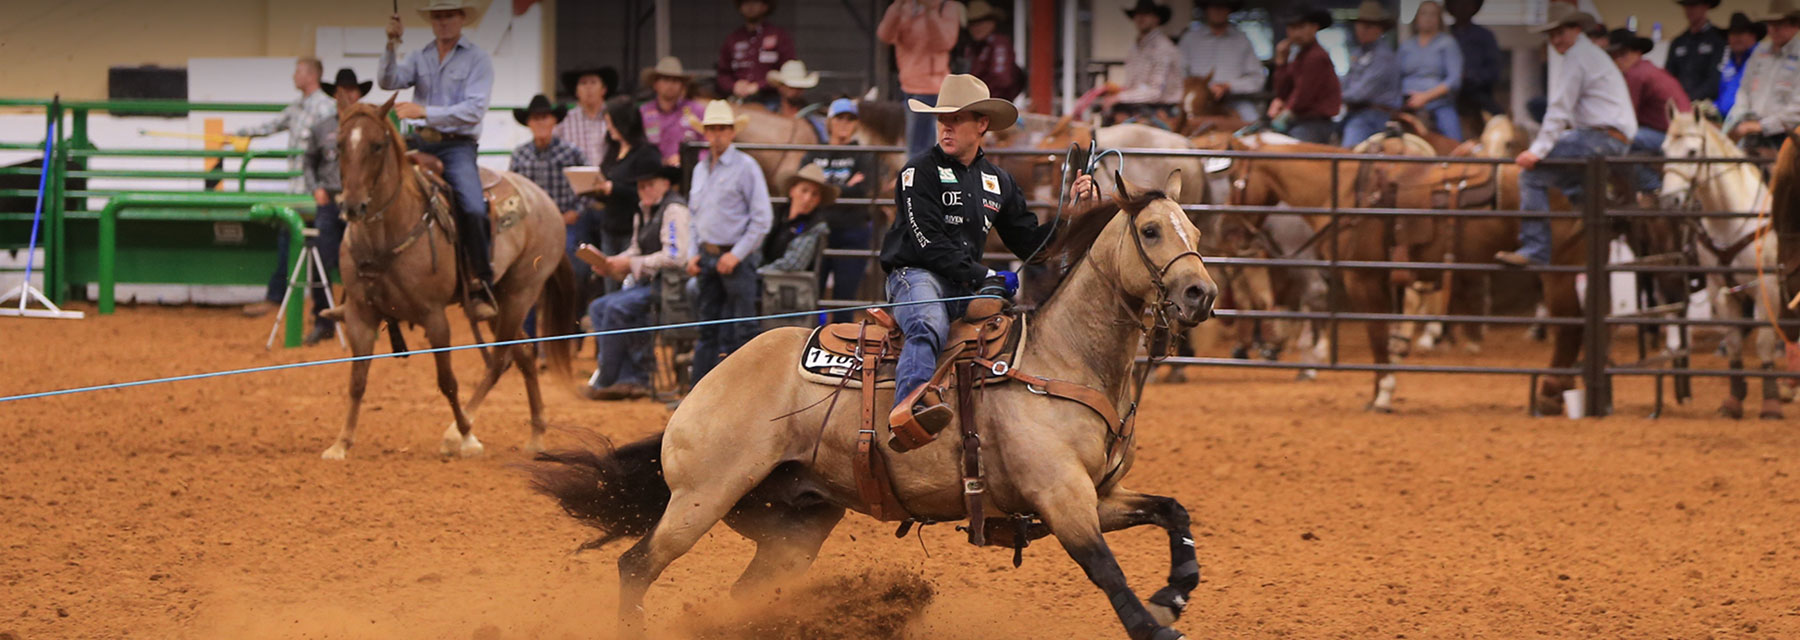 Trevor Brazile at a rodeo